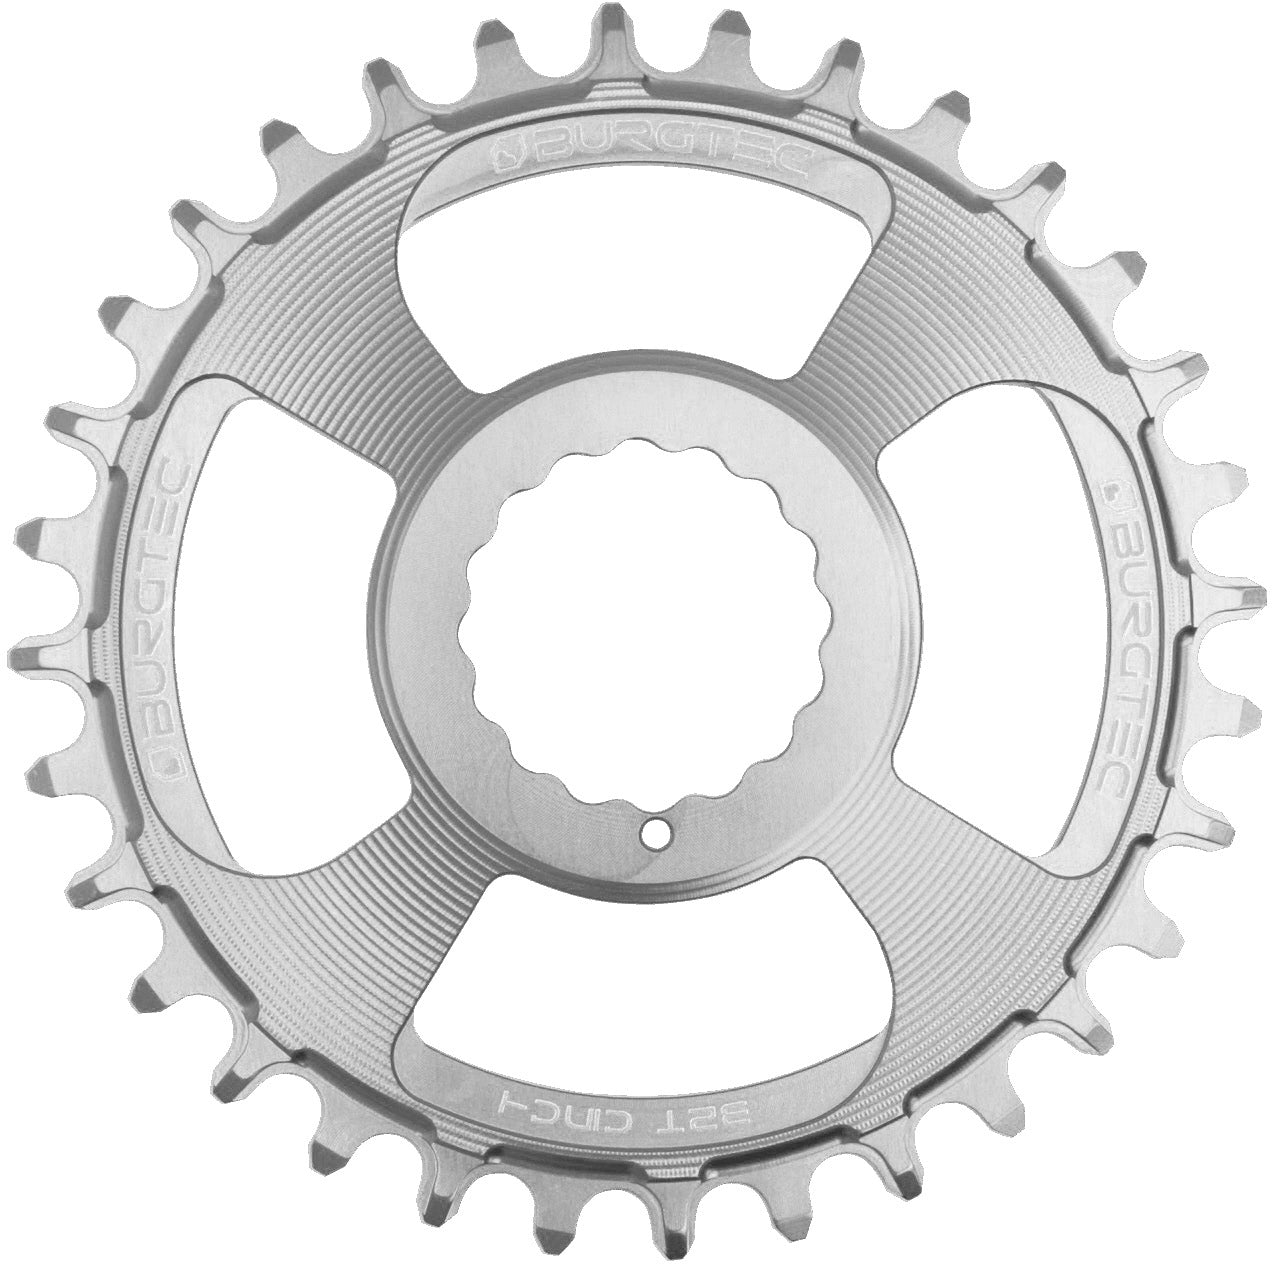 Burgtec Chainring Thick Thin - Cinch direct mount